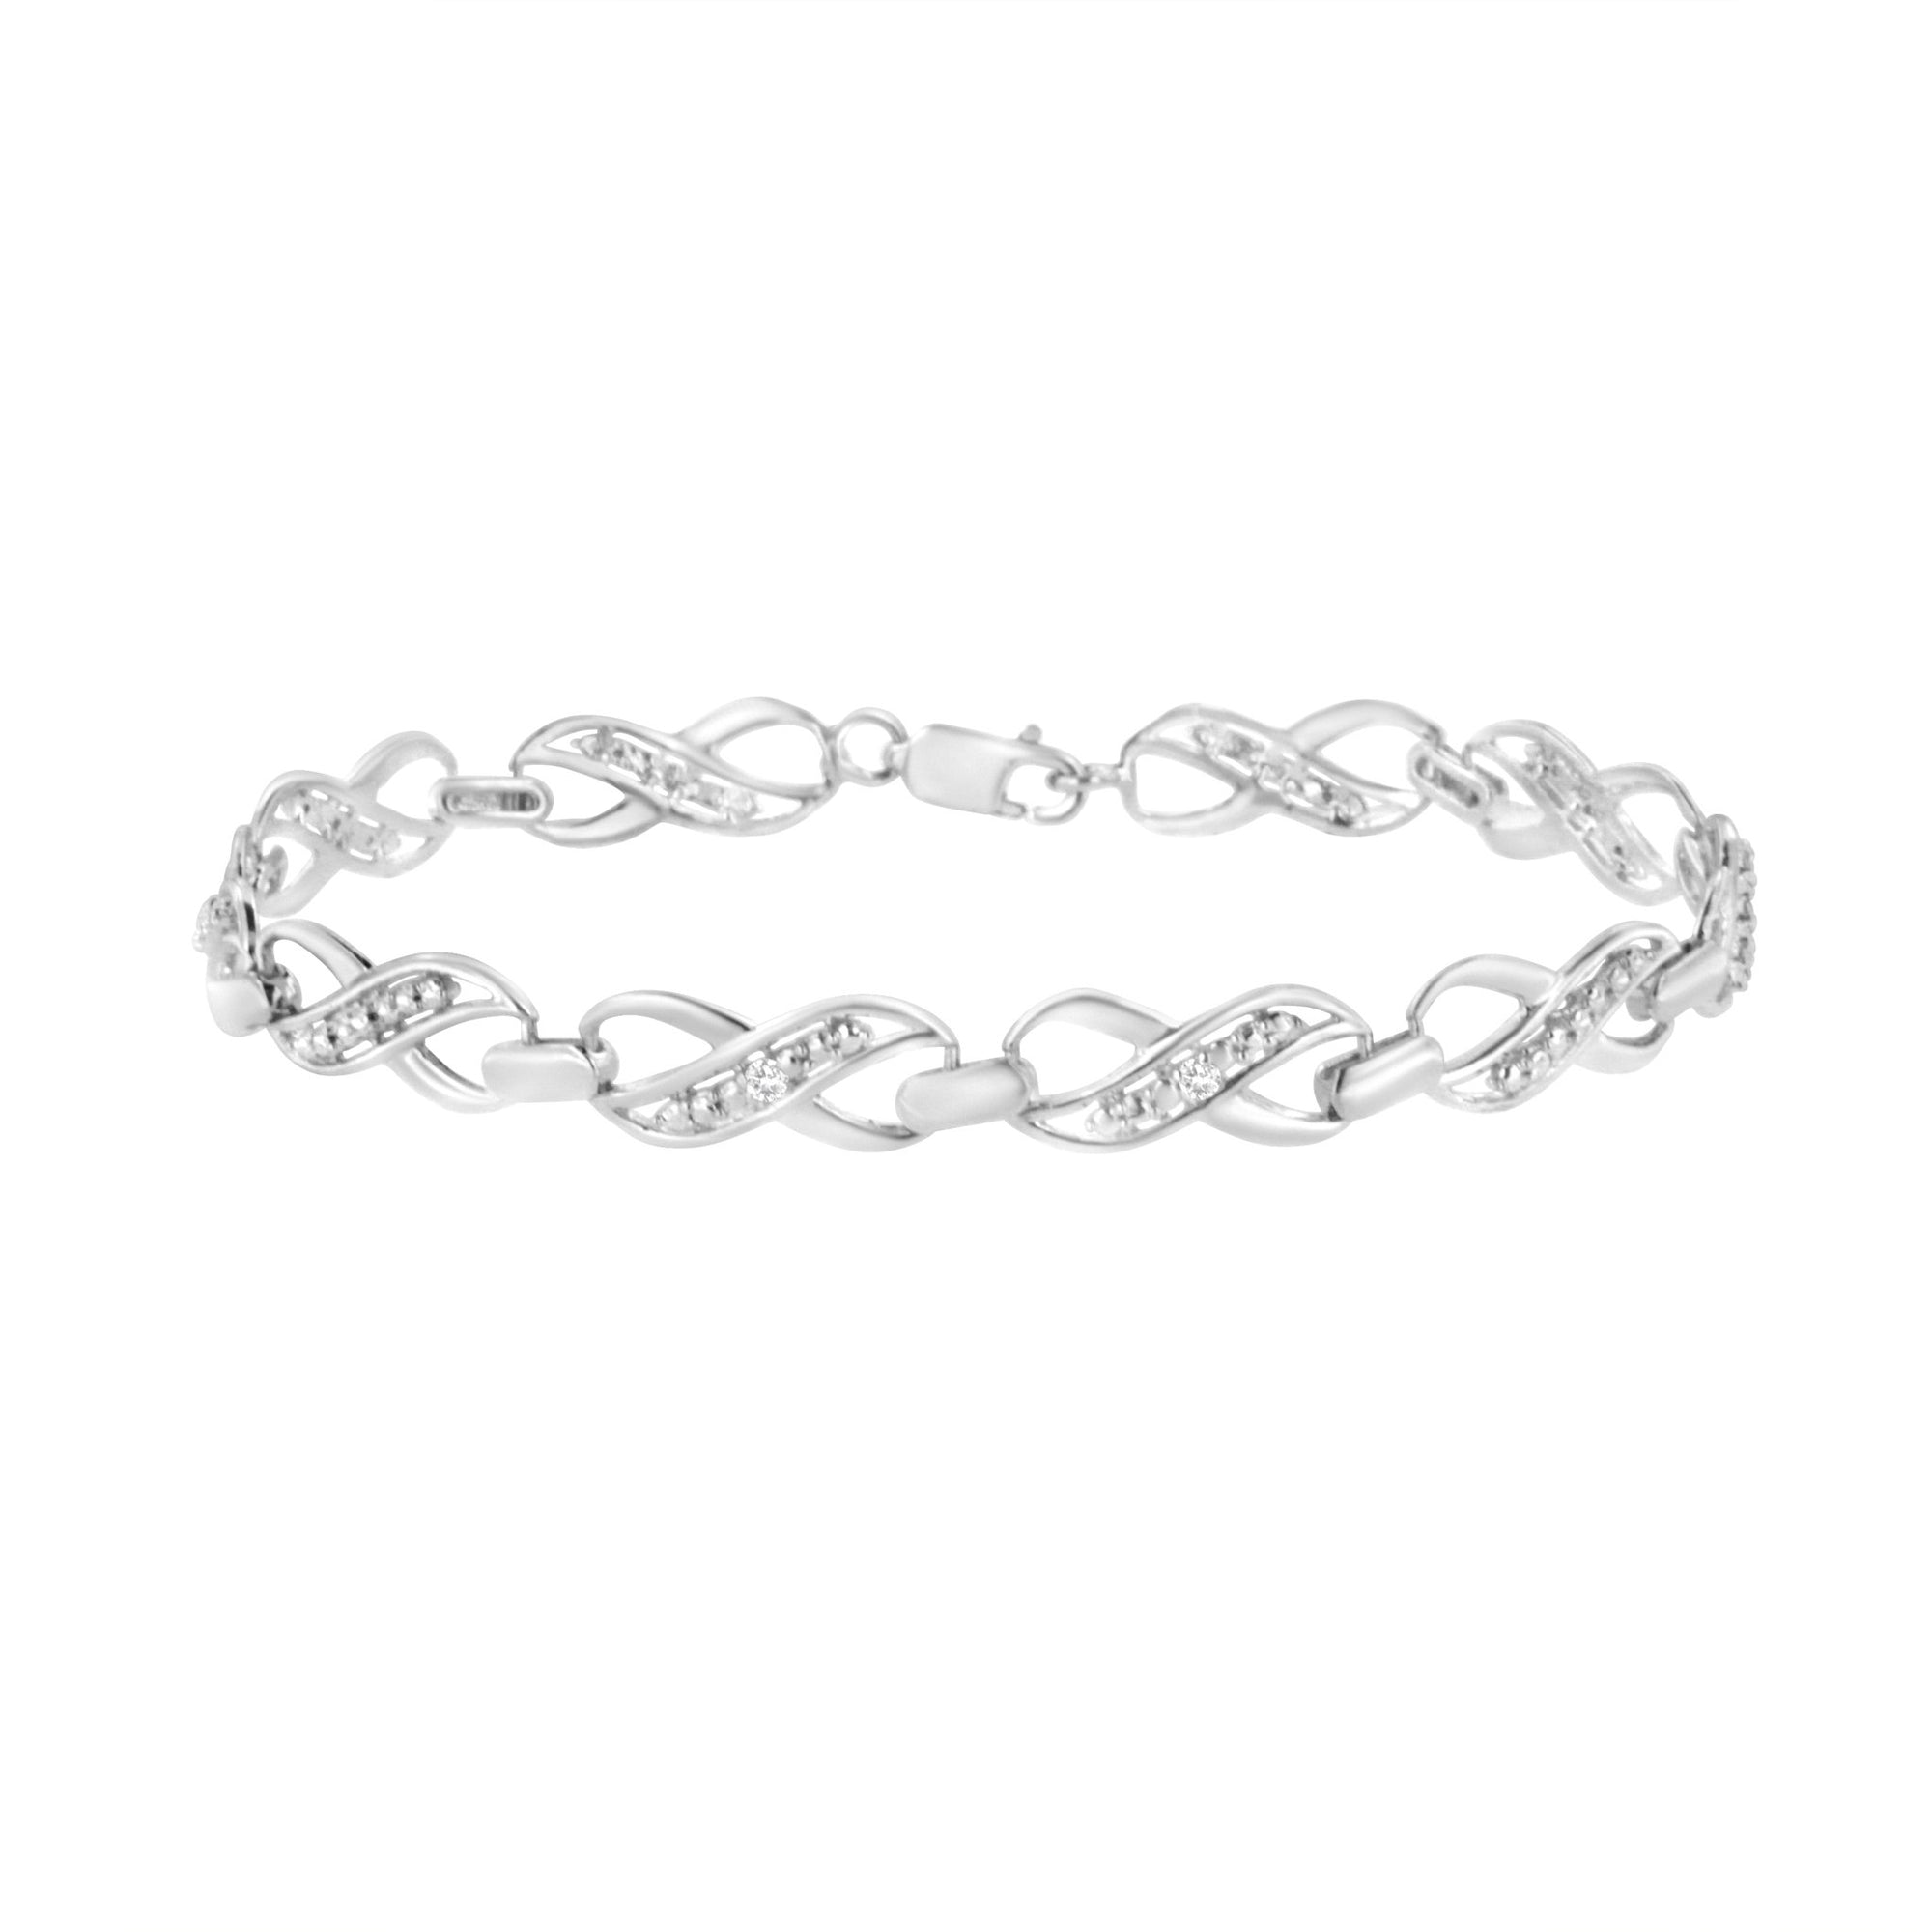 .925 Sterling Silver Prong Set Diamond Accent Ribbon and Infinity Link Bracelet (I-J Color, I3 Clarity) - 7.25" - LinkagejewelrydesignLinkagejewelrydesign